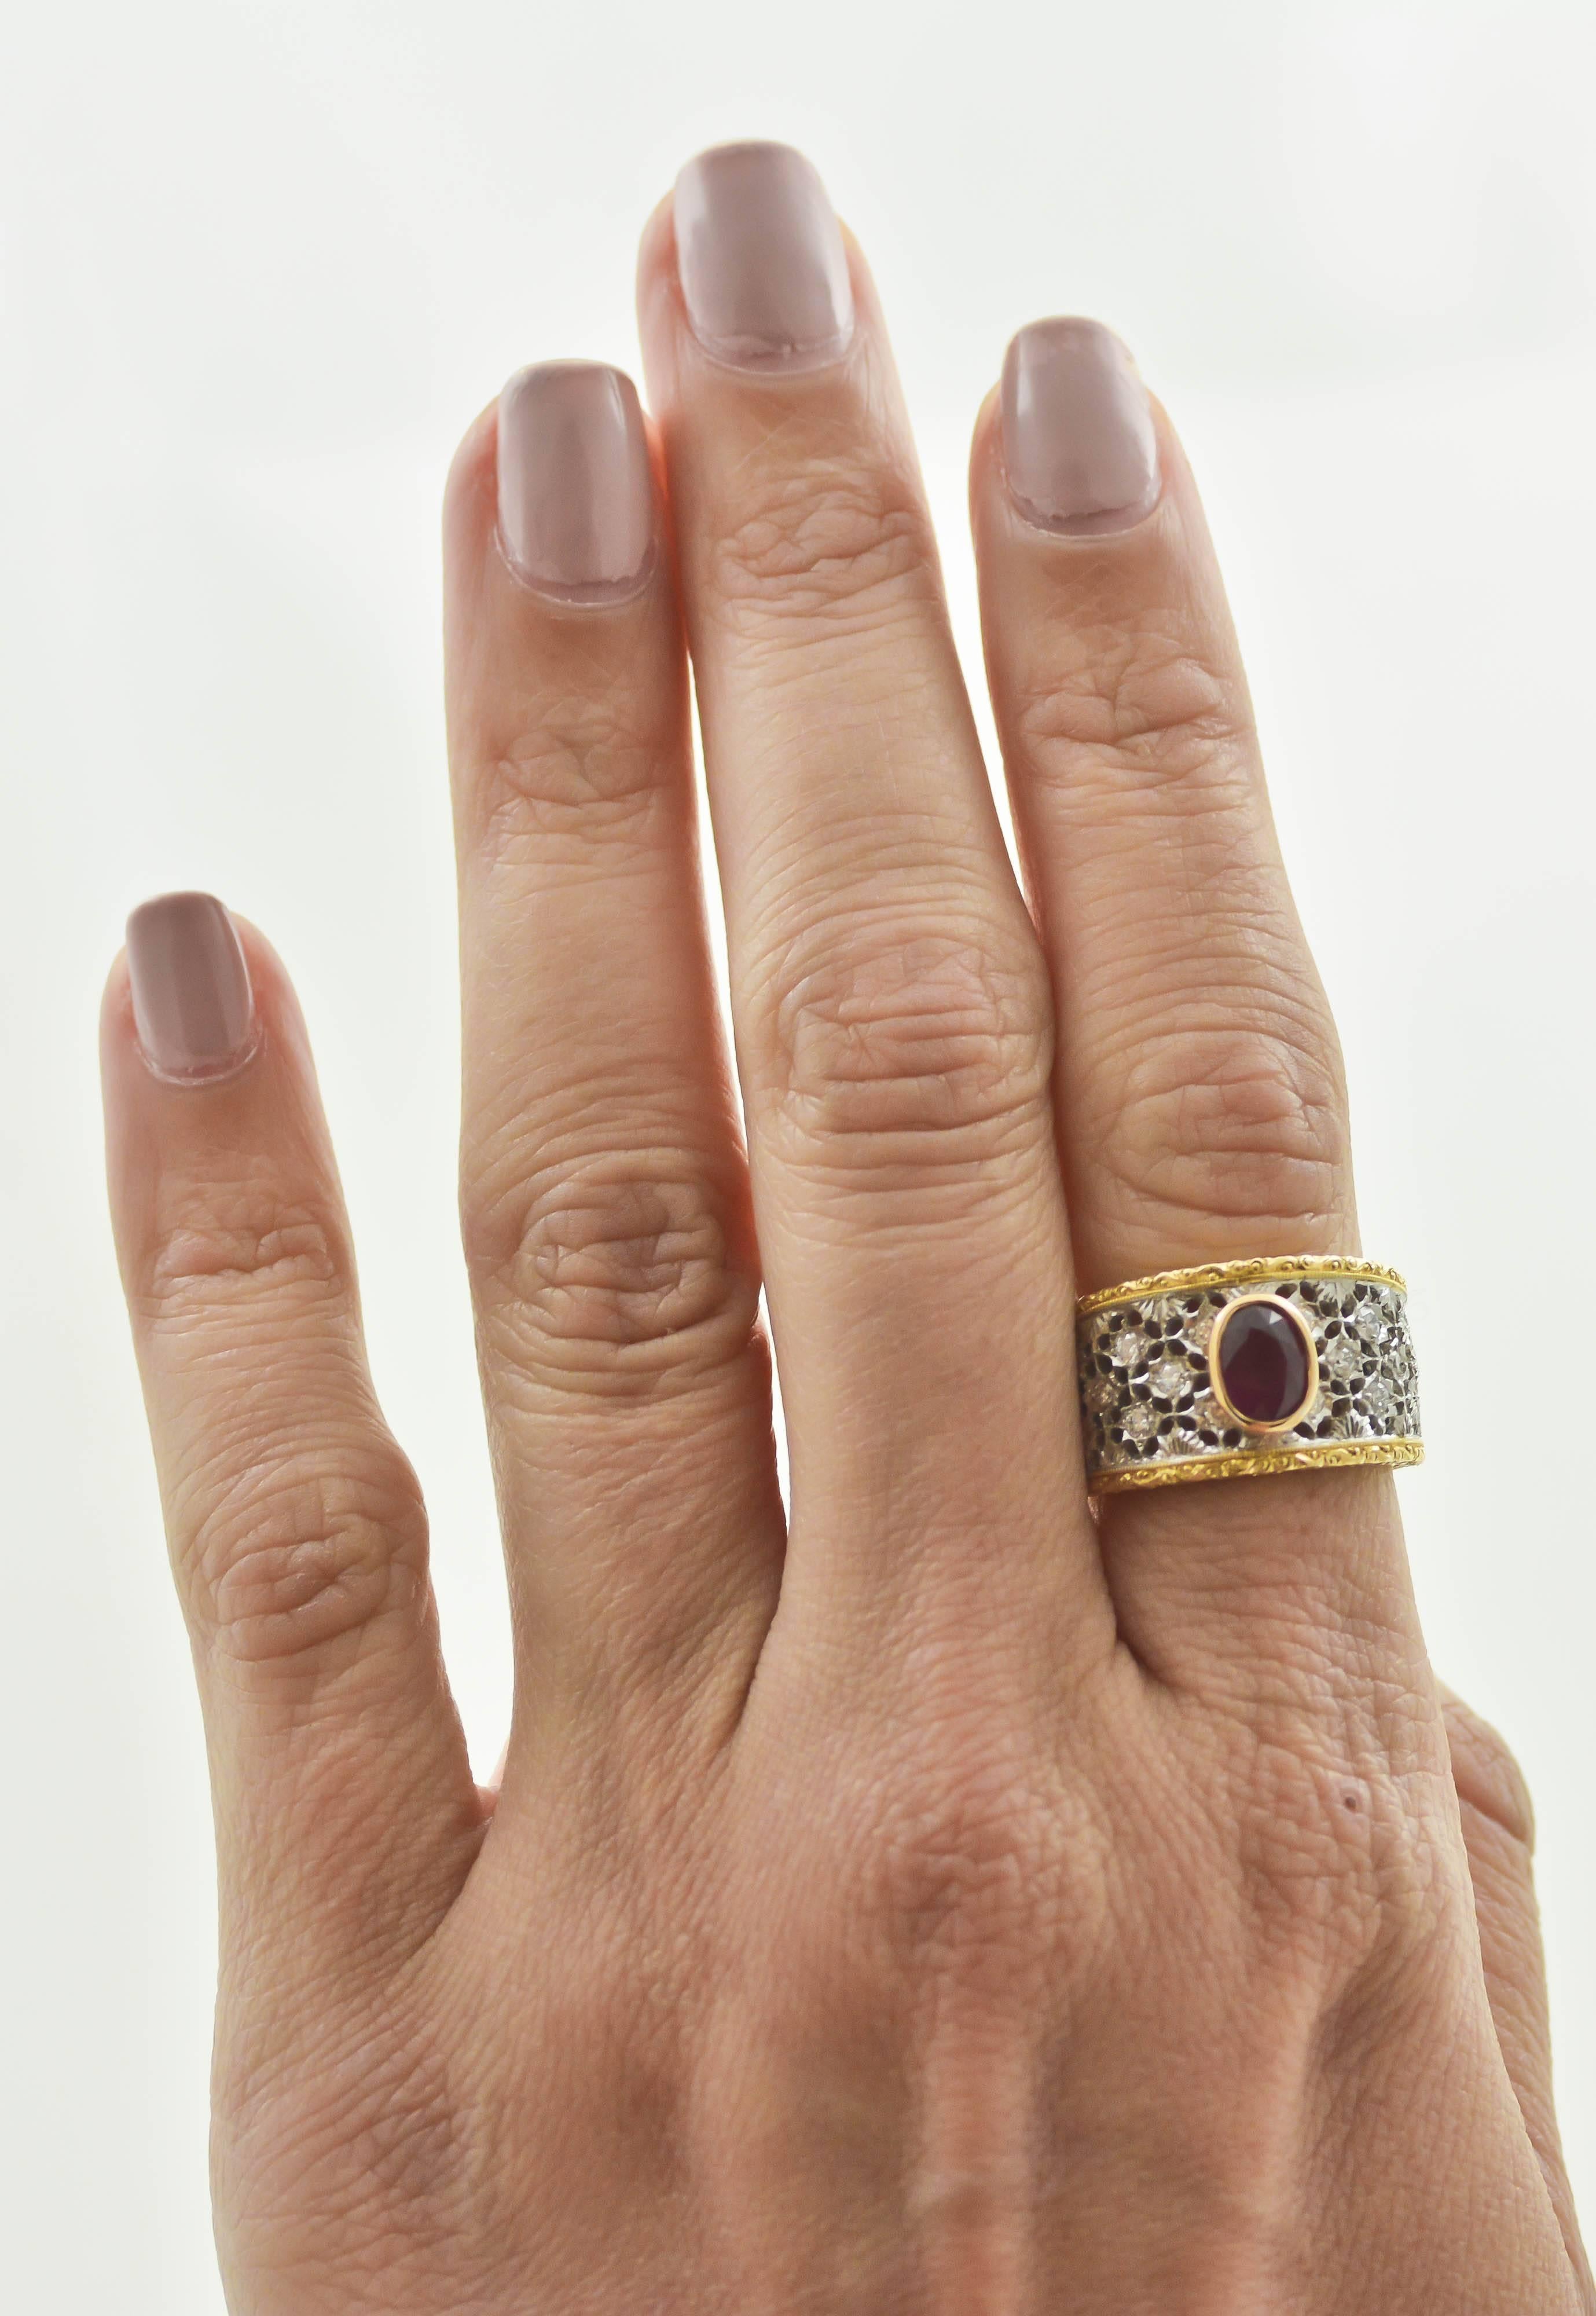 For the woman who loves wide rings, this elegant and royally fashionable ring designed by Italian Maini Gioielli, is precisely the one to please. A 1.20 carat, oval, brilliant-cut, deep red ruby is the focal point of this stunning ring. It is